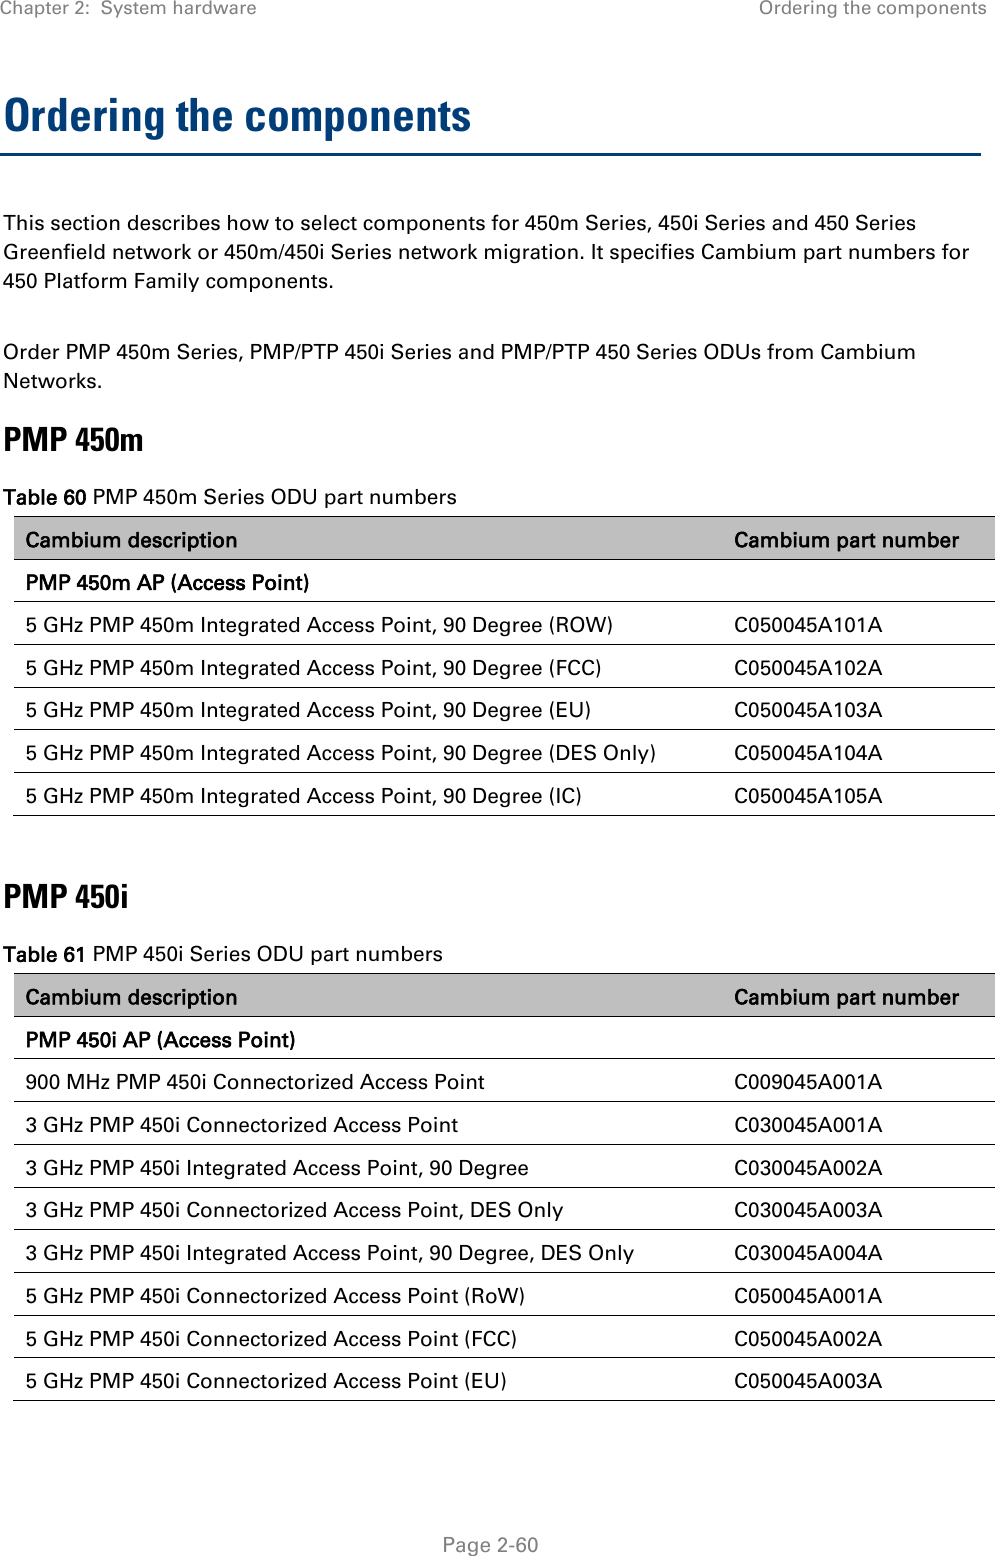 Chapter 2:  System hardware Ordering the components   Page 2-60 Ordering the components This section describes how to select components for 450m Series, 450i Series and 450 Series Greenfield network or 450m/450i Series network migration. It specifies Cambium part numbers for 450 Platform Family components.  Order PMP 450m Series, PMP/PTP 450i Series and PMP/PTP 450 Series ODUs from Cambium Networks.  PMP 450m Table 60 PMP 450m Series ODU part numbers Cambium description Cambium part number PMP 450m AP (Access Point)   5 GHz PMP 450m Integrated Access Point, 90 Degree (ROW) C050045A101A 5 GHz PMP 450m Integrated Access Point, 90 Degree (FCC) C050045A102A 5 GHz PMP 450m Integrated Access Point, 90 Degree (EU) C050045A103A 5 GHz PMP 450m Integrated Access Point, 90 Degree (DES Only) C050045A104A 5 GHz PMP 450m Integrated Access Point, 90 Degree (IC) C050045A105A  PMP 450i Table 61 PMP 450i Series ODU part numbers Cambium description Cambium part number PMP 450i AP (Access Point)   900 MHz PMP 450i Connectorized Access Point C009045A001A 3 GHz PMP 450i Connectorized Access Point C030045A001A 3 GHz PMP 450i Integrated Access Point, 90 Degree C030045A002A 3 GHz PMP 450i Connectorized Access Point, DES Only C030045A003A 3 GHz PMP 450i Integrated Access Point, 90 Degree, DES Only C030045A004A 5 GHz PMP 450i Connectorized Access Point (RoW) C050045A001A 5 GHz PMP 450i Connectorized Access Point (FCC) C050045A002A 5 GHz PMP 450i Connectorized Access Point (EU) C050045A003A 